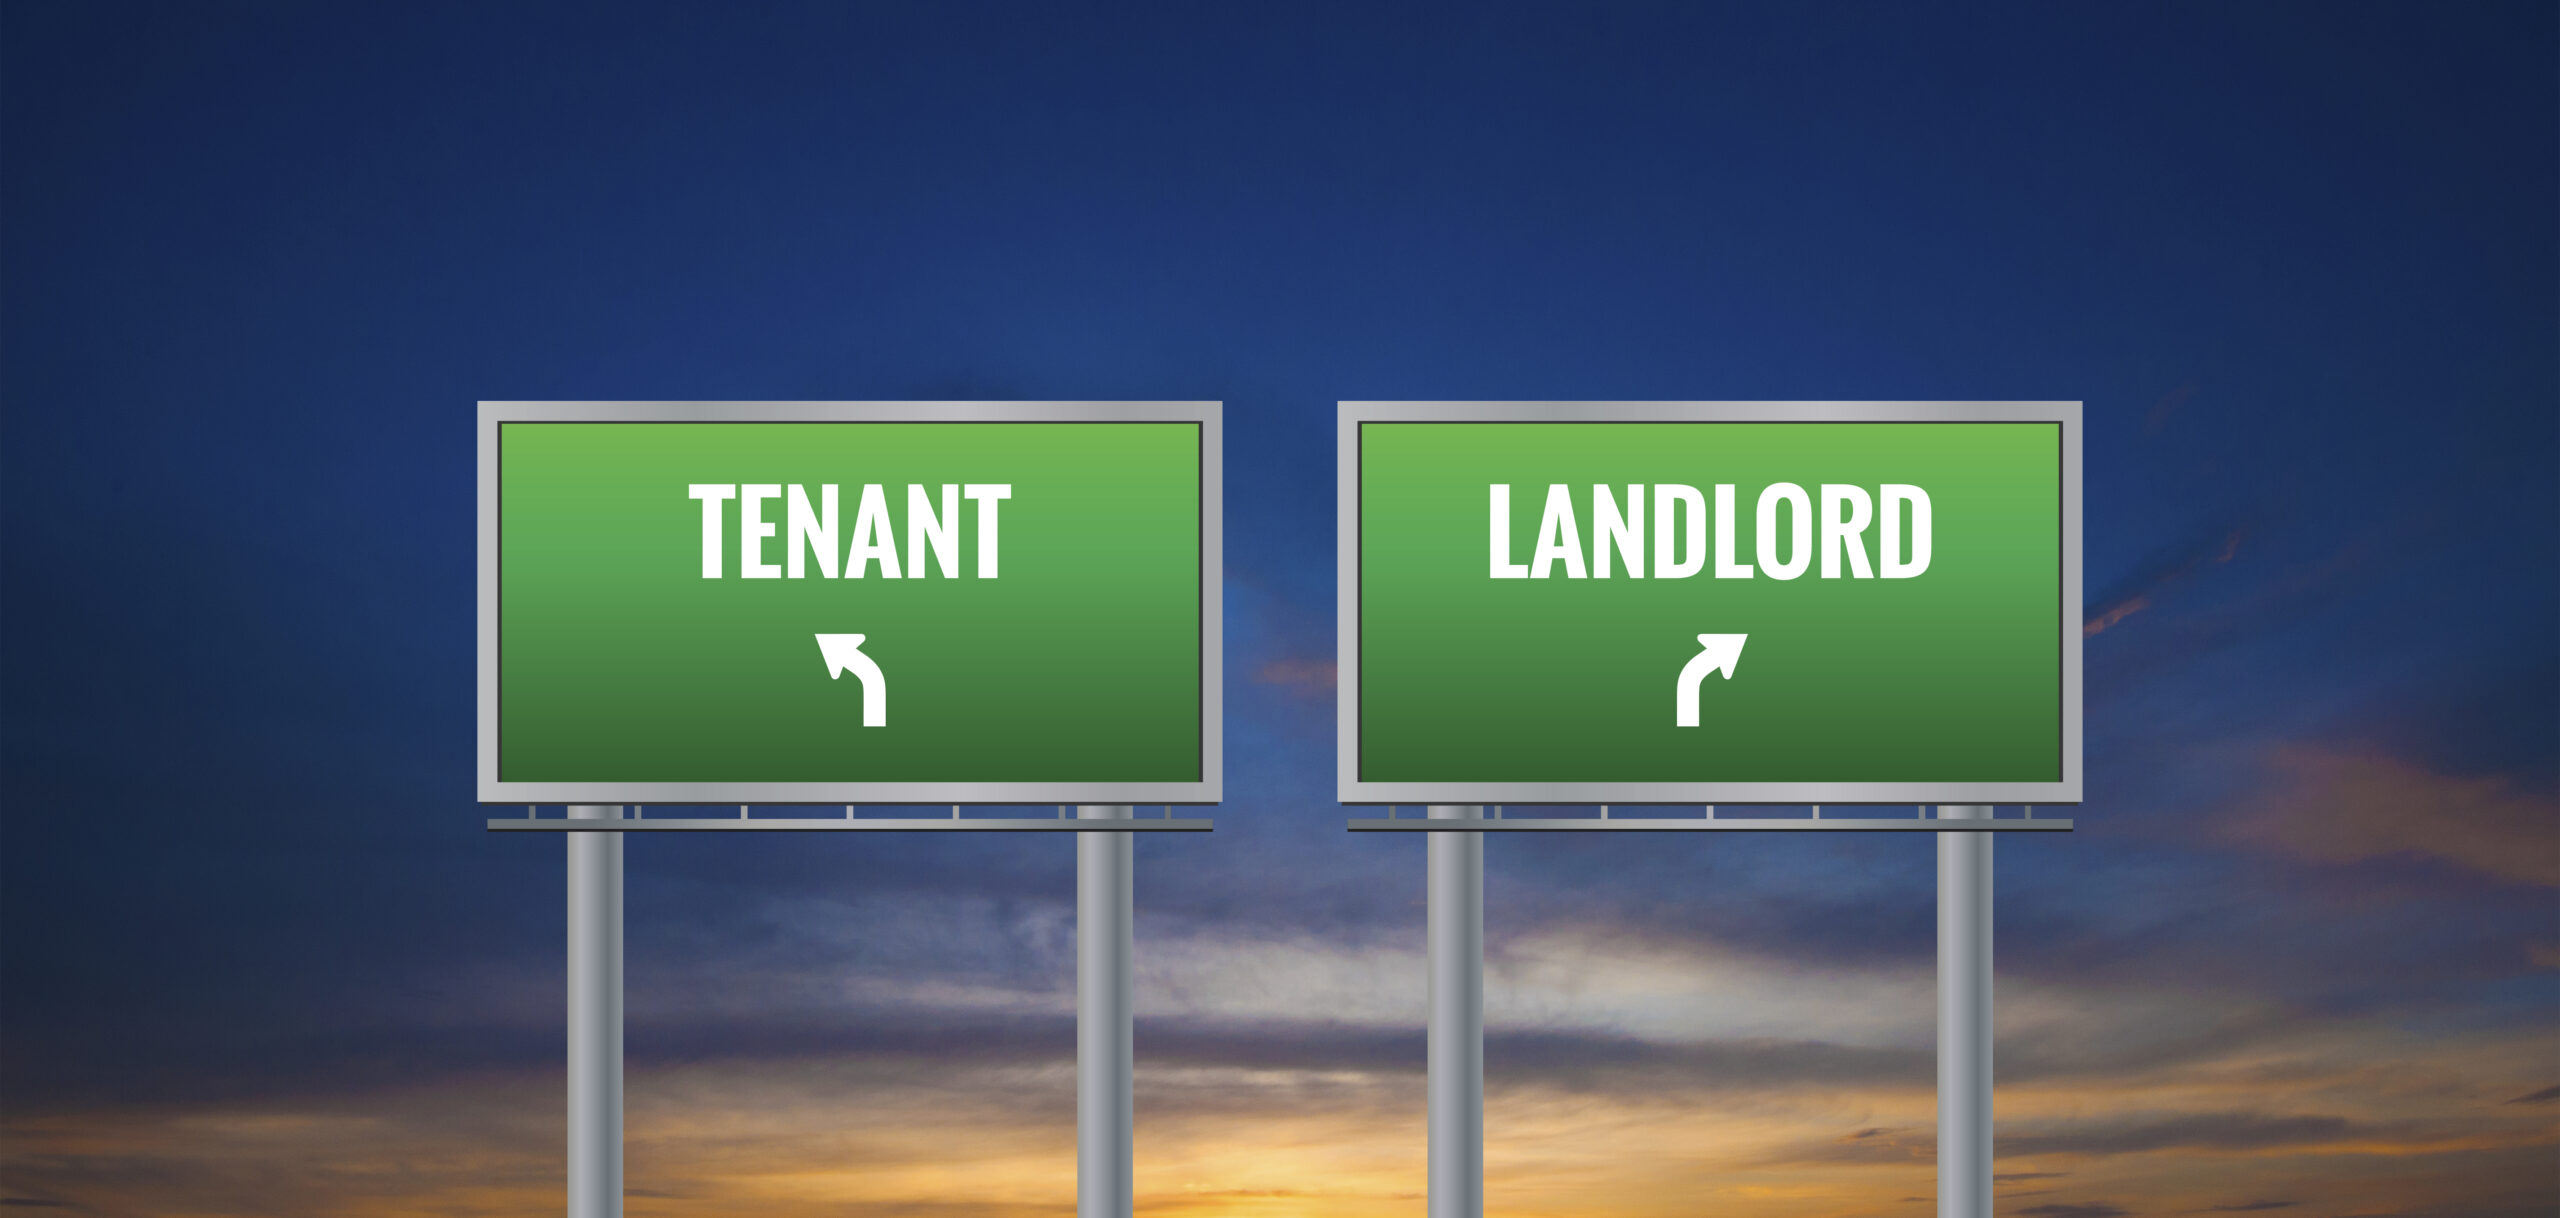 Do I have to Move If My Landlord Won’t Renew My Lease?